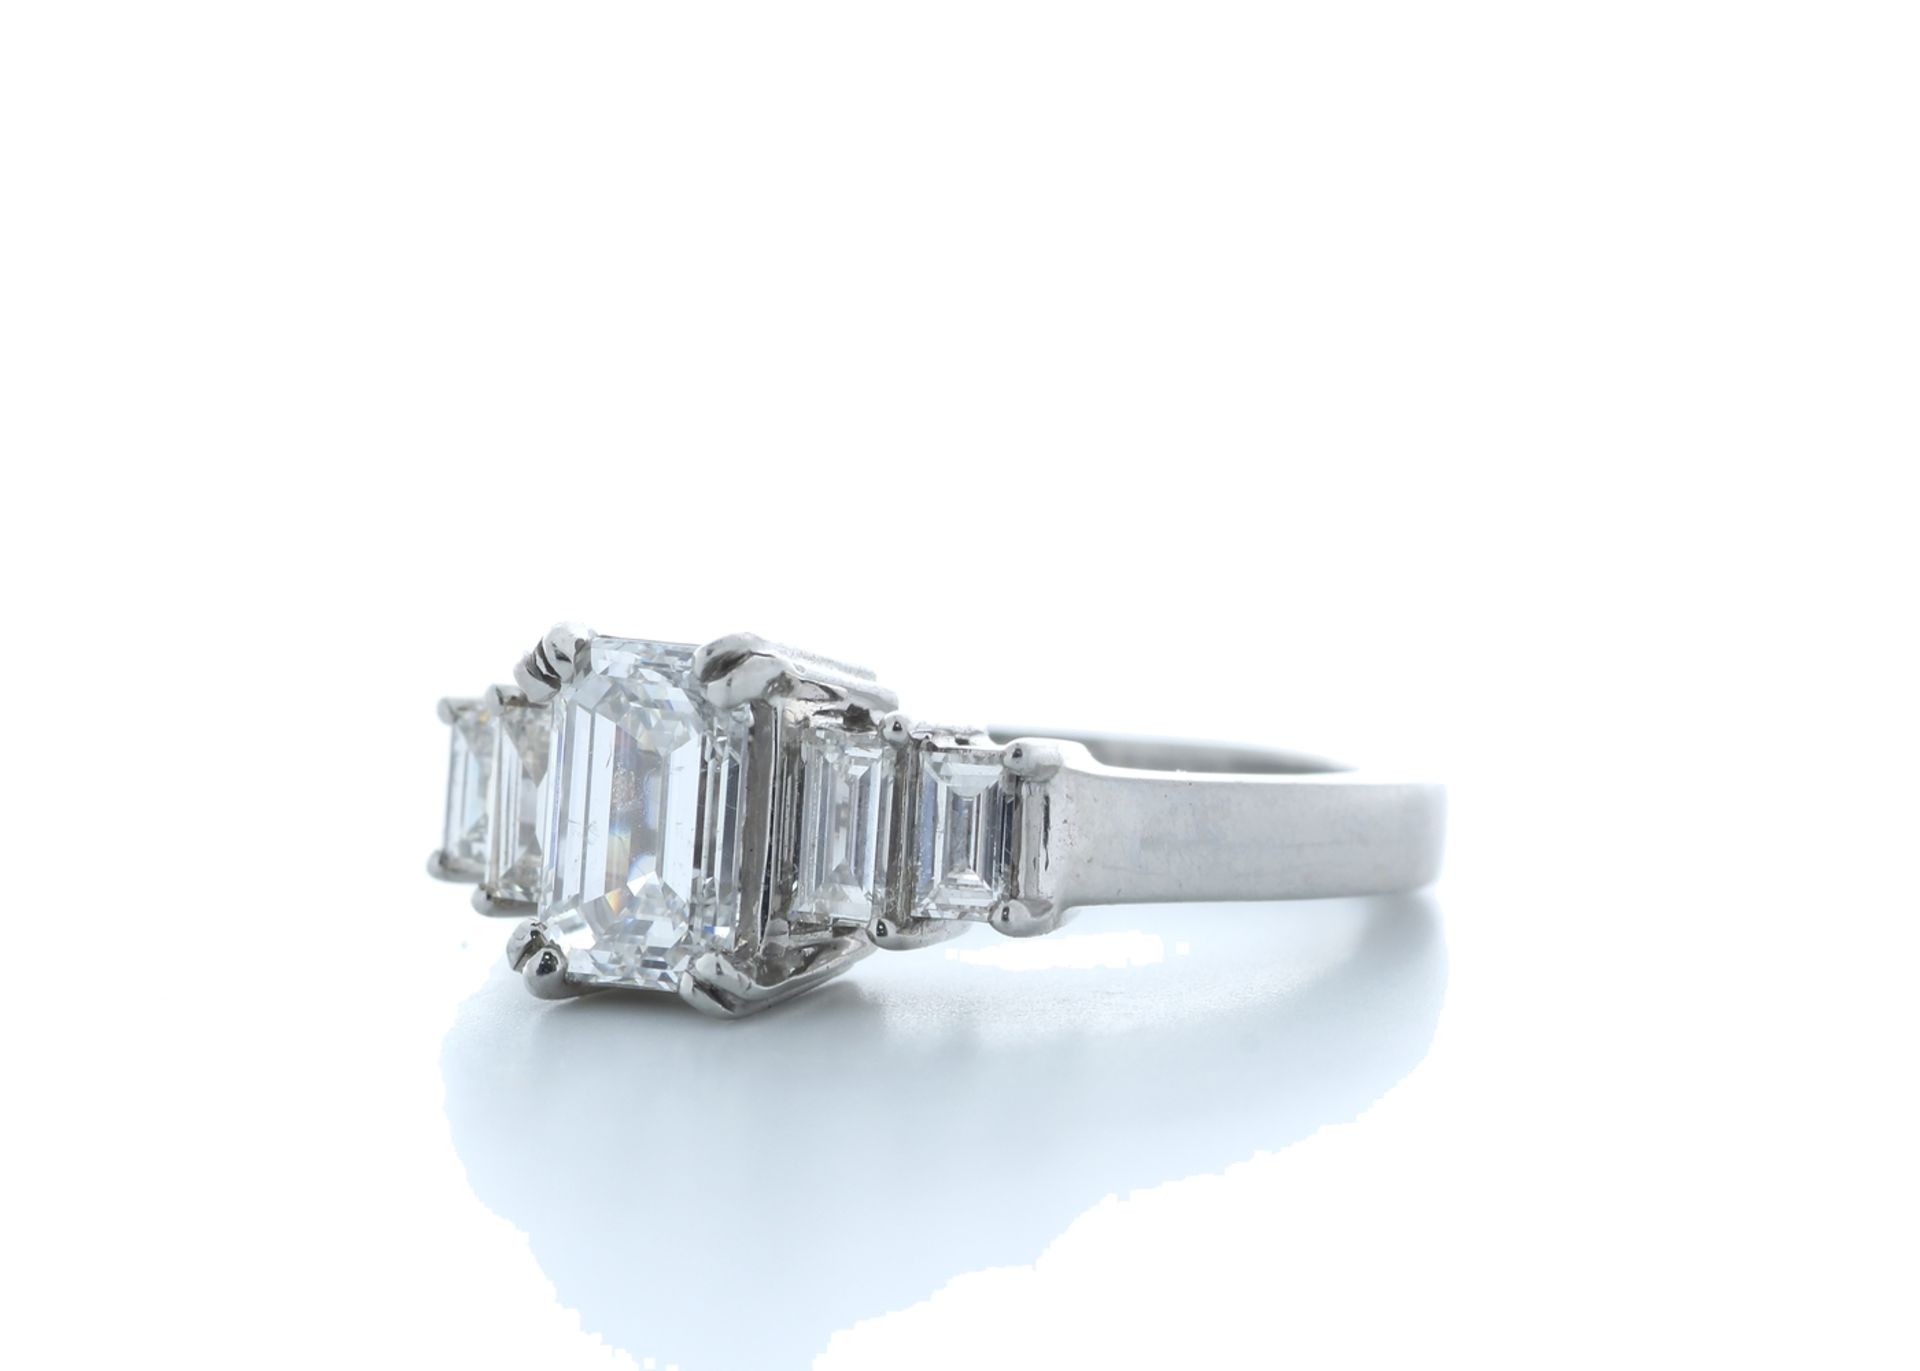 18ct White Gold Emerald Cut Diamond Ring 1.73 (1.23) Carats - Valued by IDI £28,950.00 - 18ct - Image 2 of 5